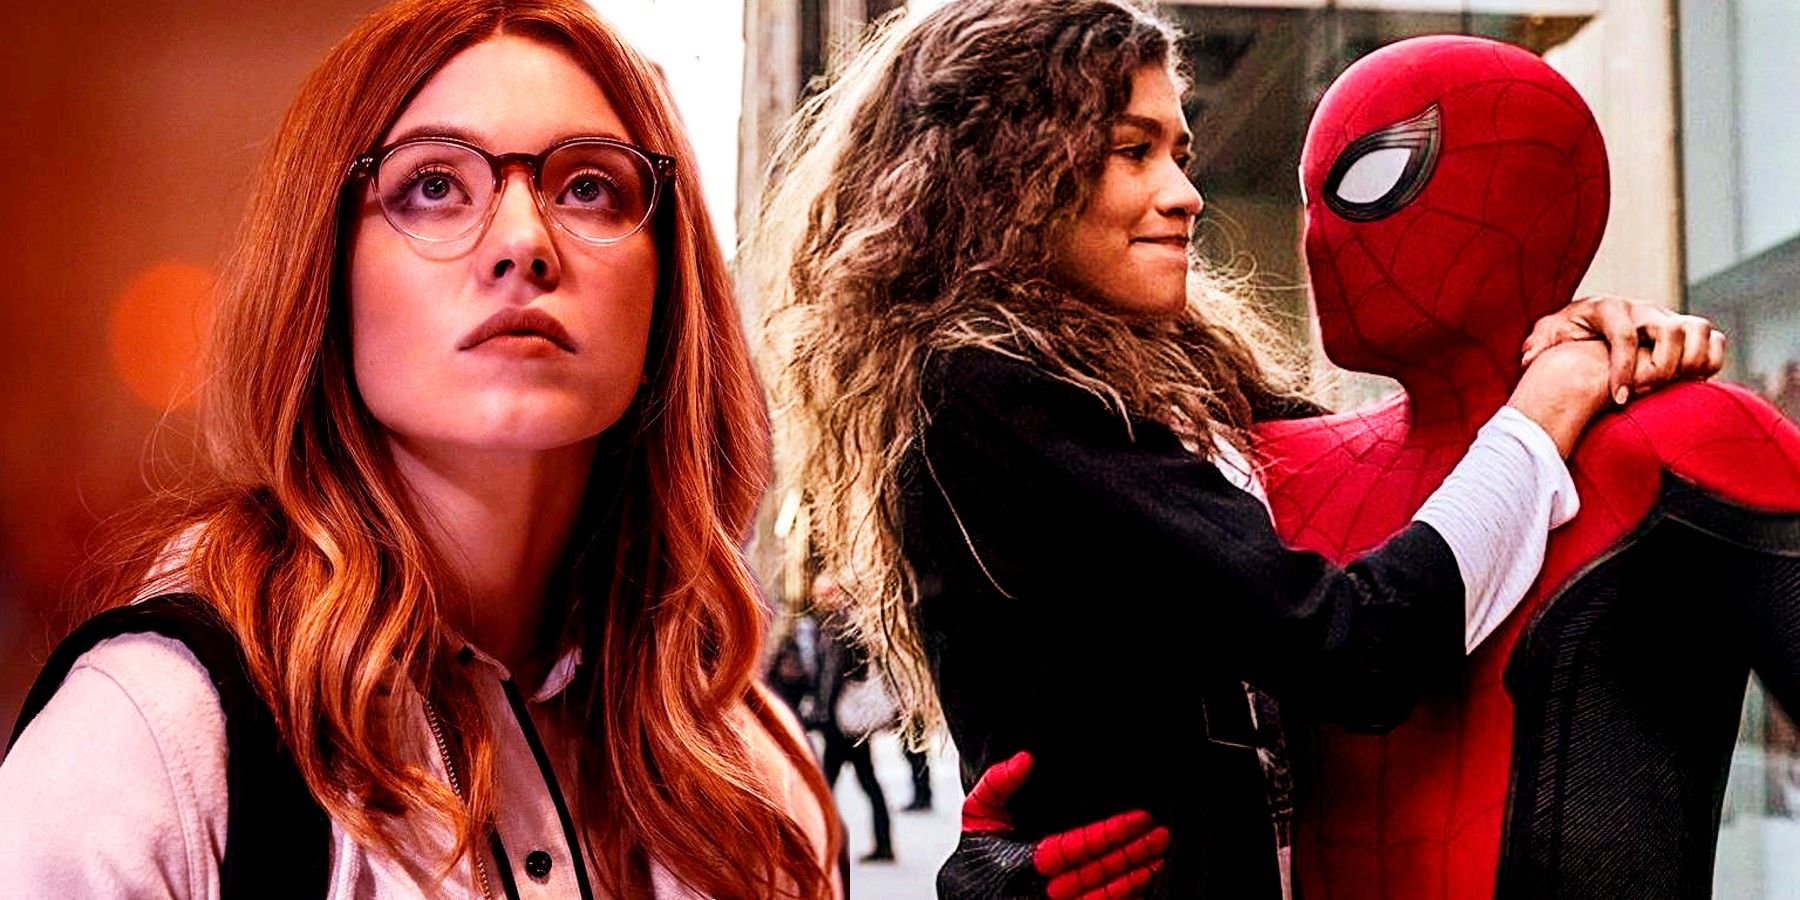 Sydney Sweeney from Madame Web next to Zendaya's MJ and Tom Holland's Spider-Man